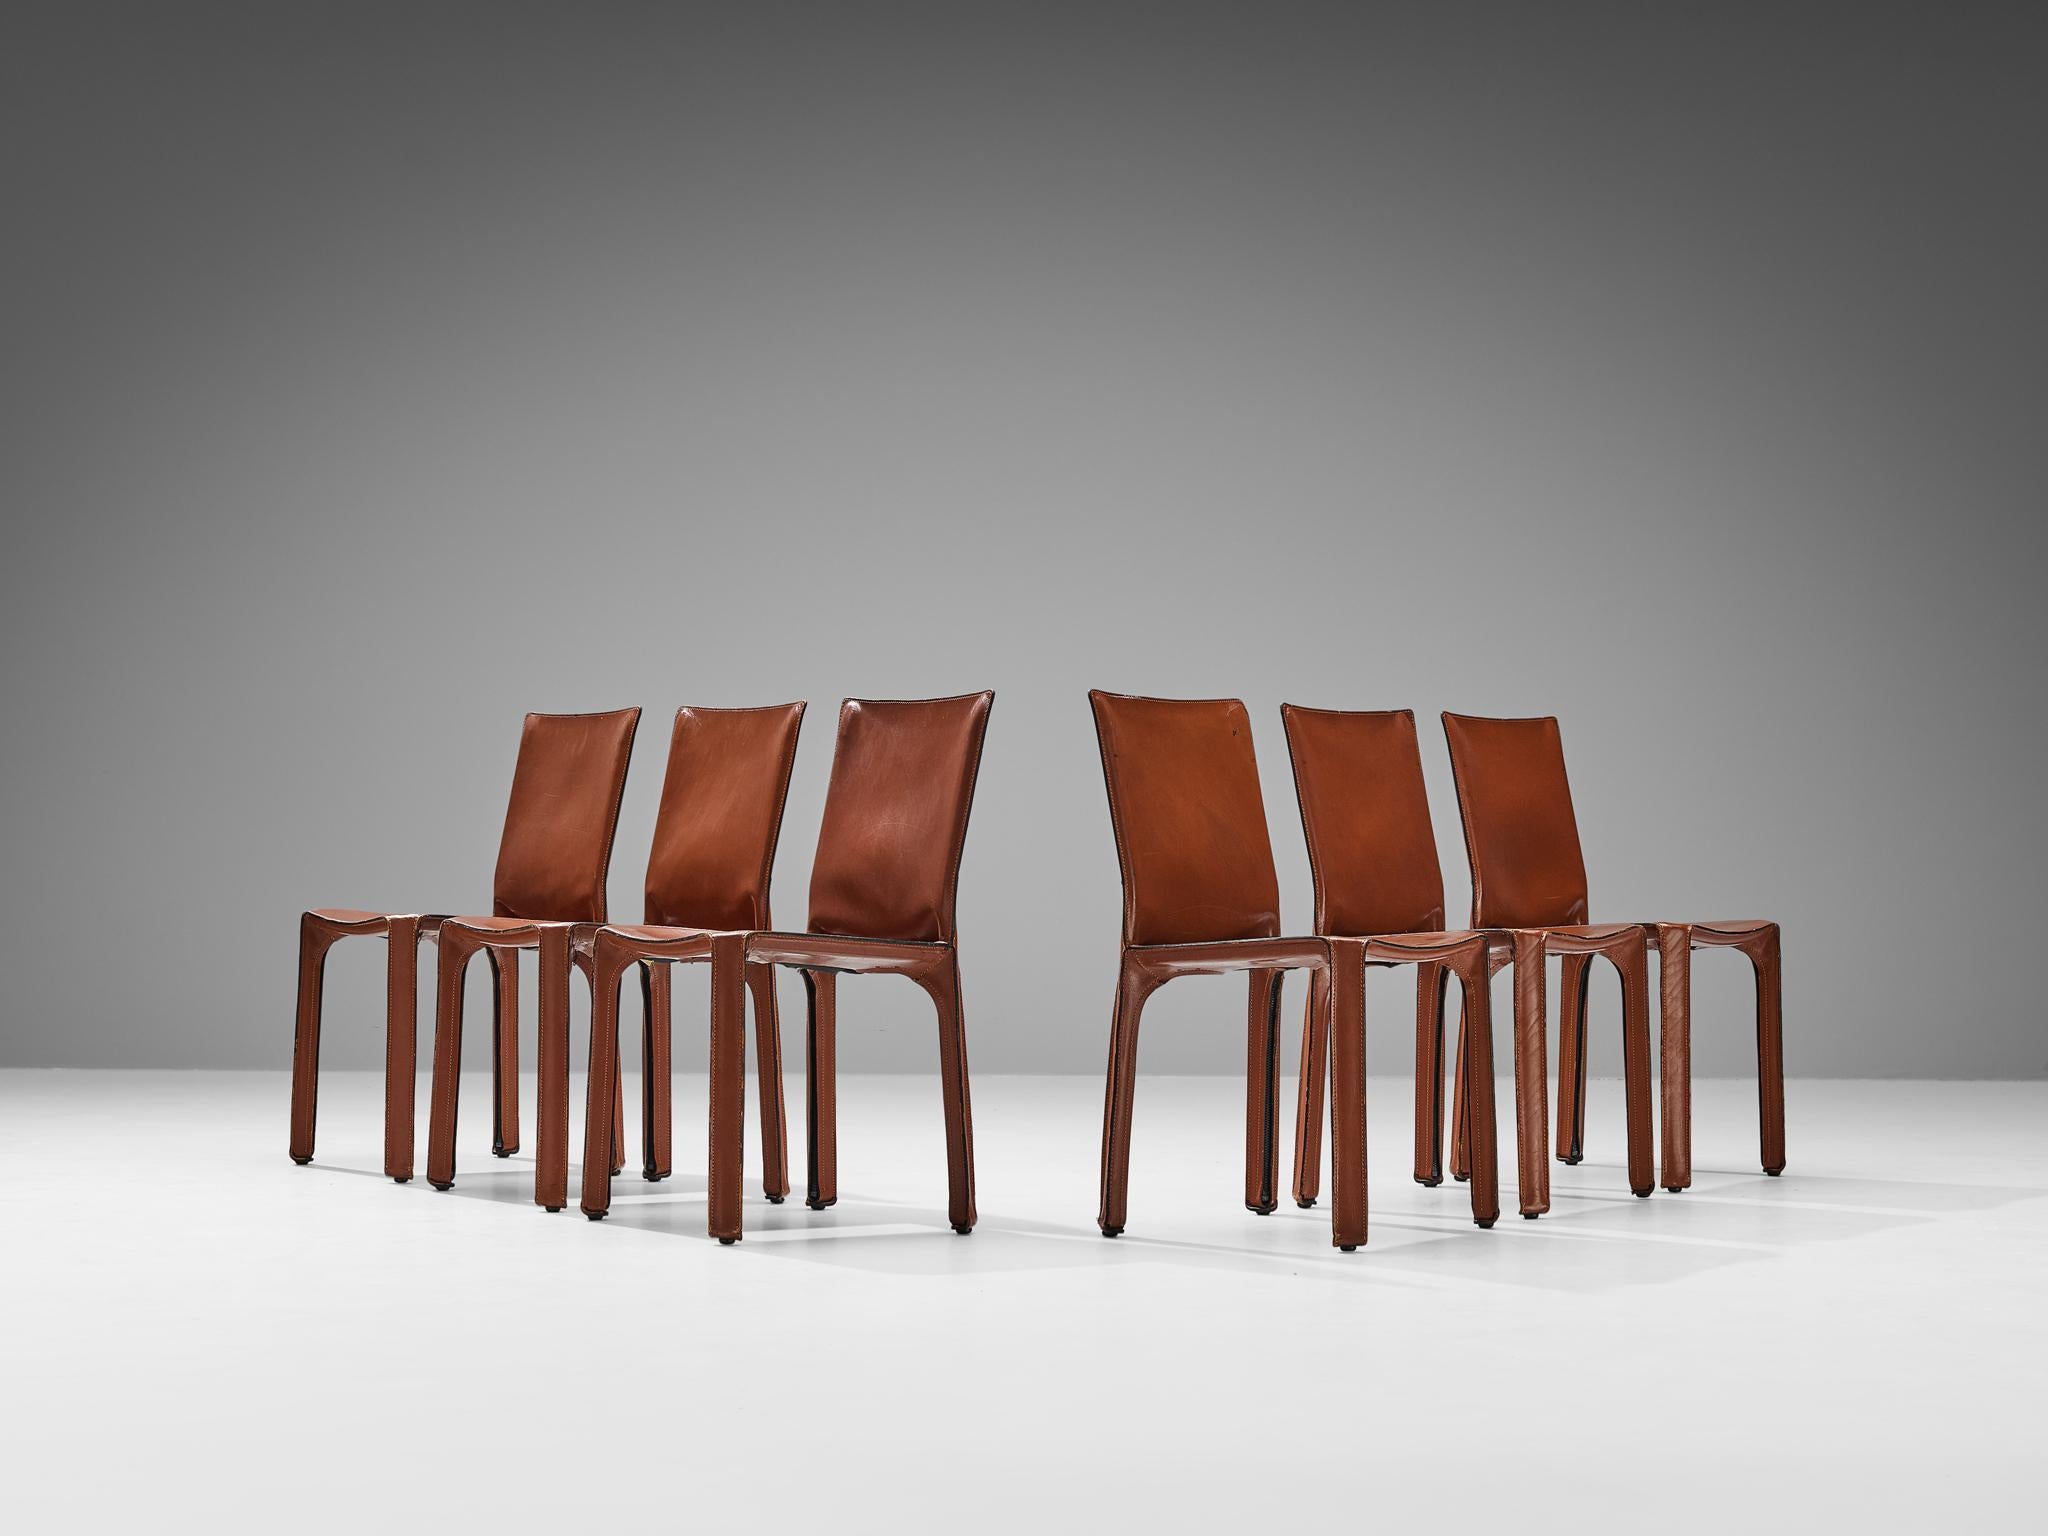 Beautiful set of six chairs in a rich red cognac leather designed by Mario Bellini. Conceptually, the chair was designed to become marked and shaped over time by its user. The leather skin fits like a glove over the steel skeleton fastened with four